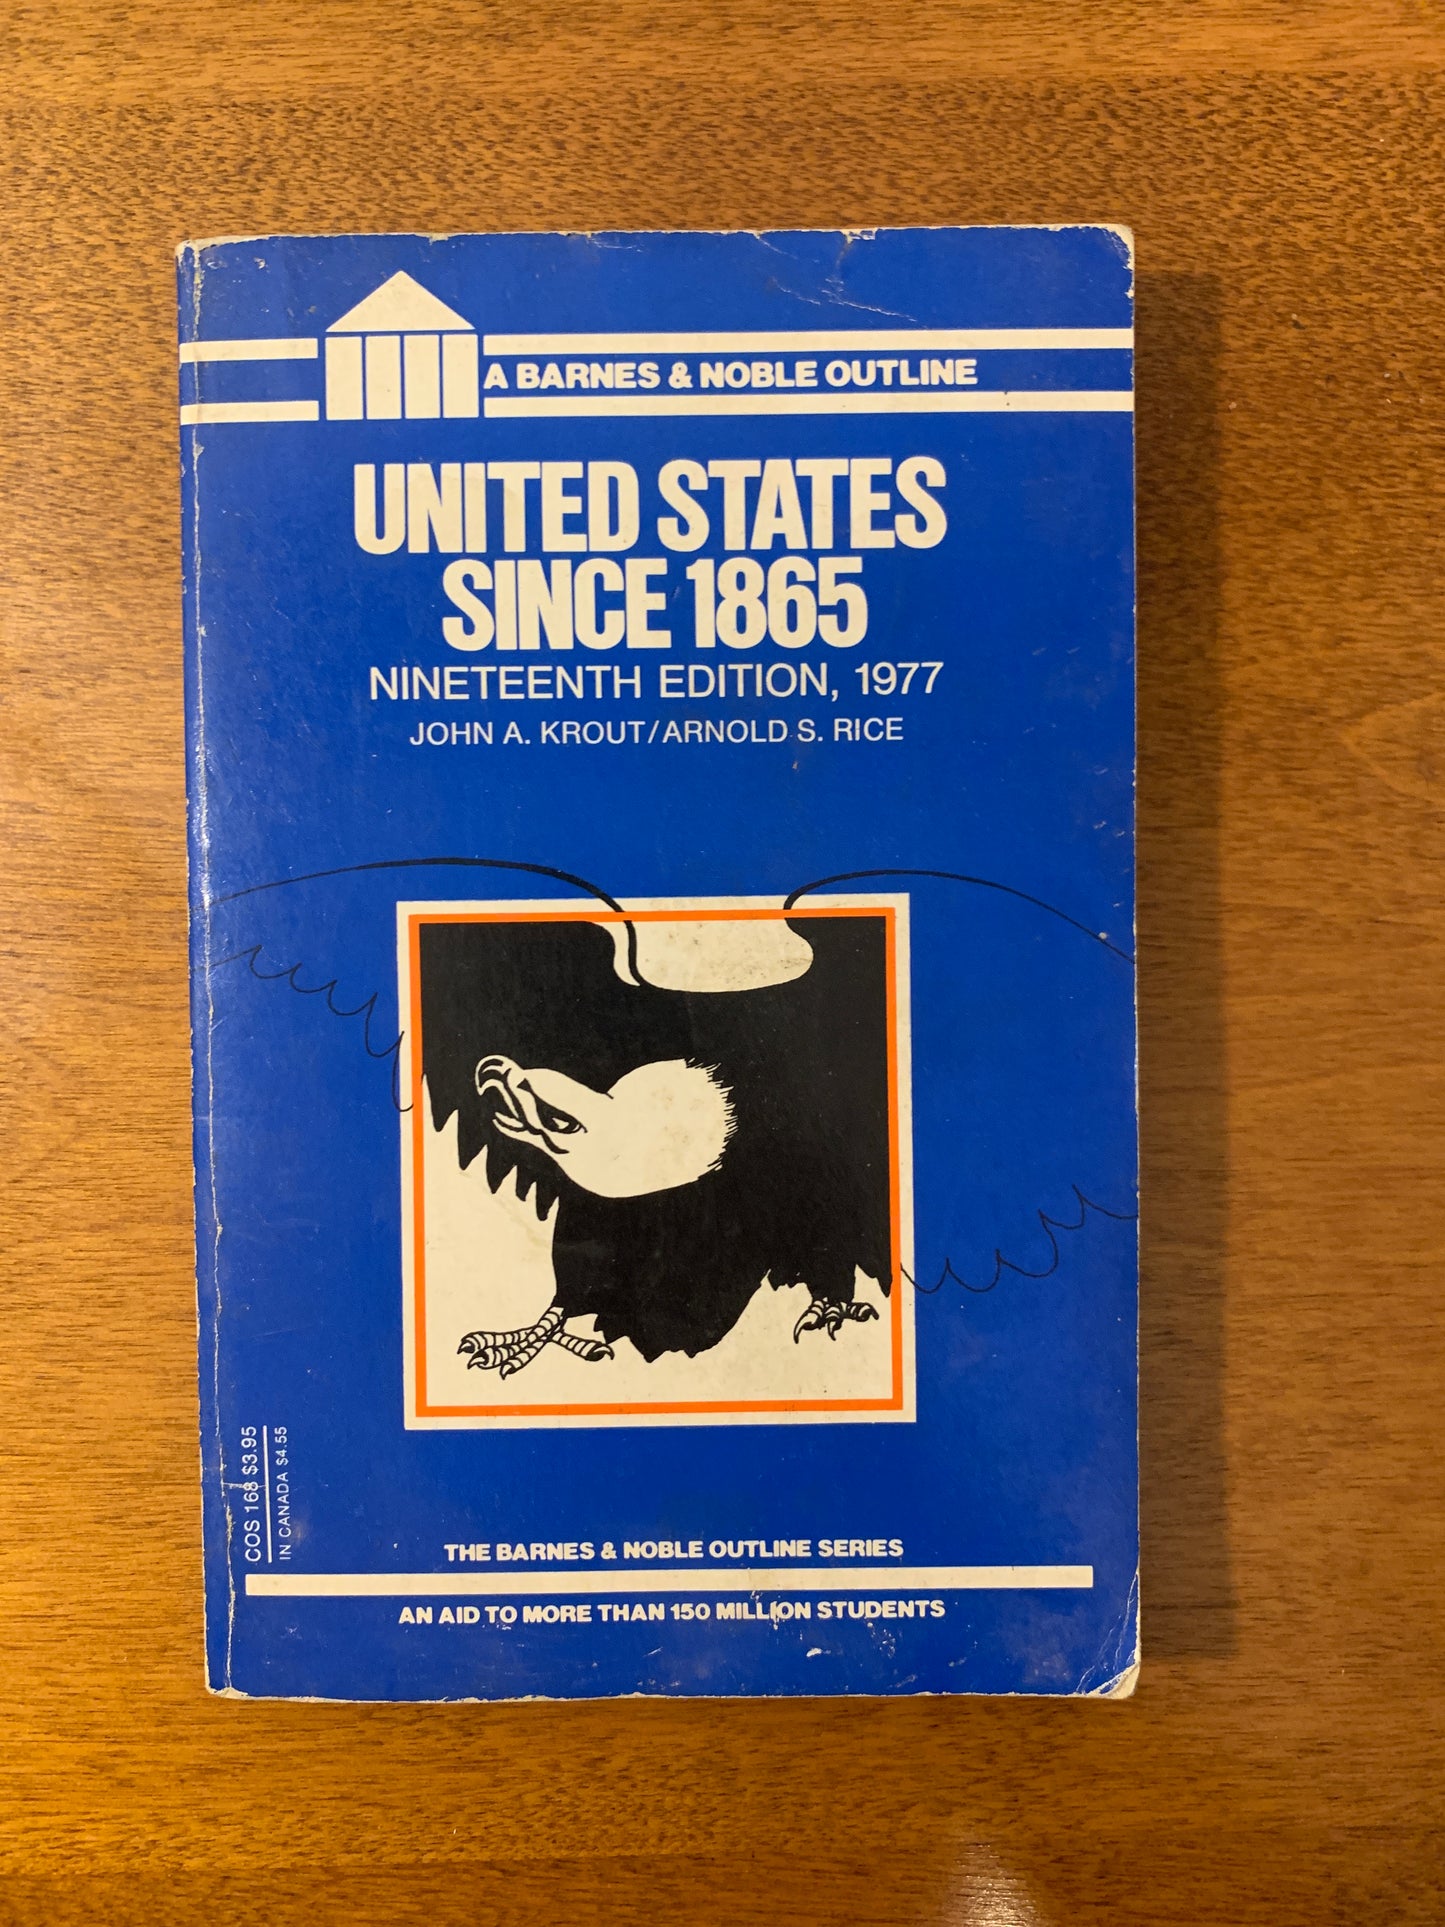 United States Since 1865 by John A. Krout, 1977